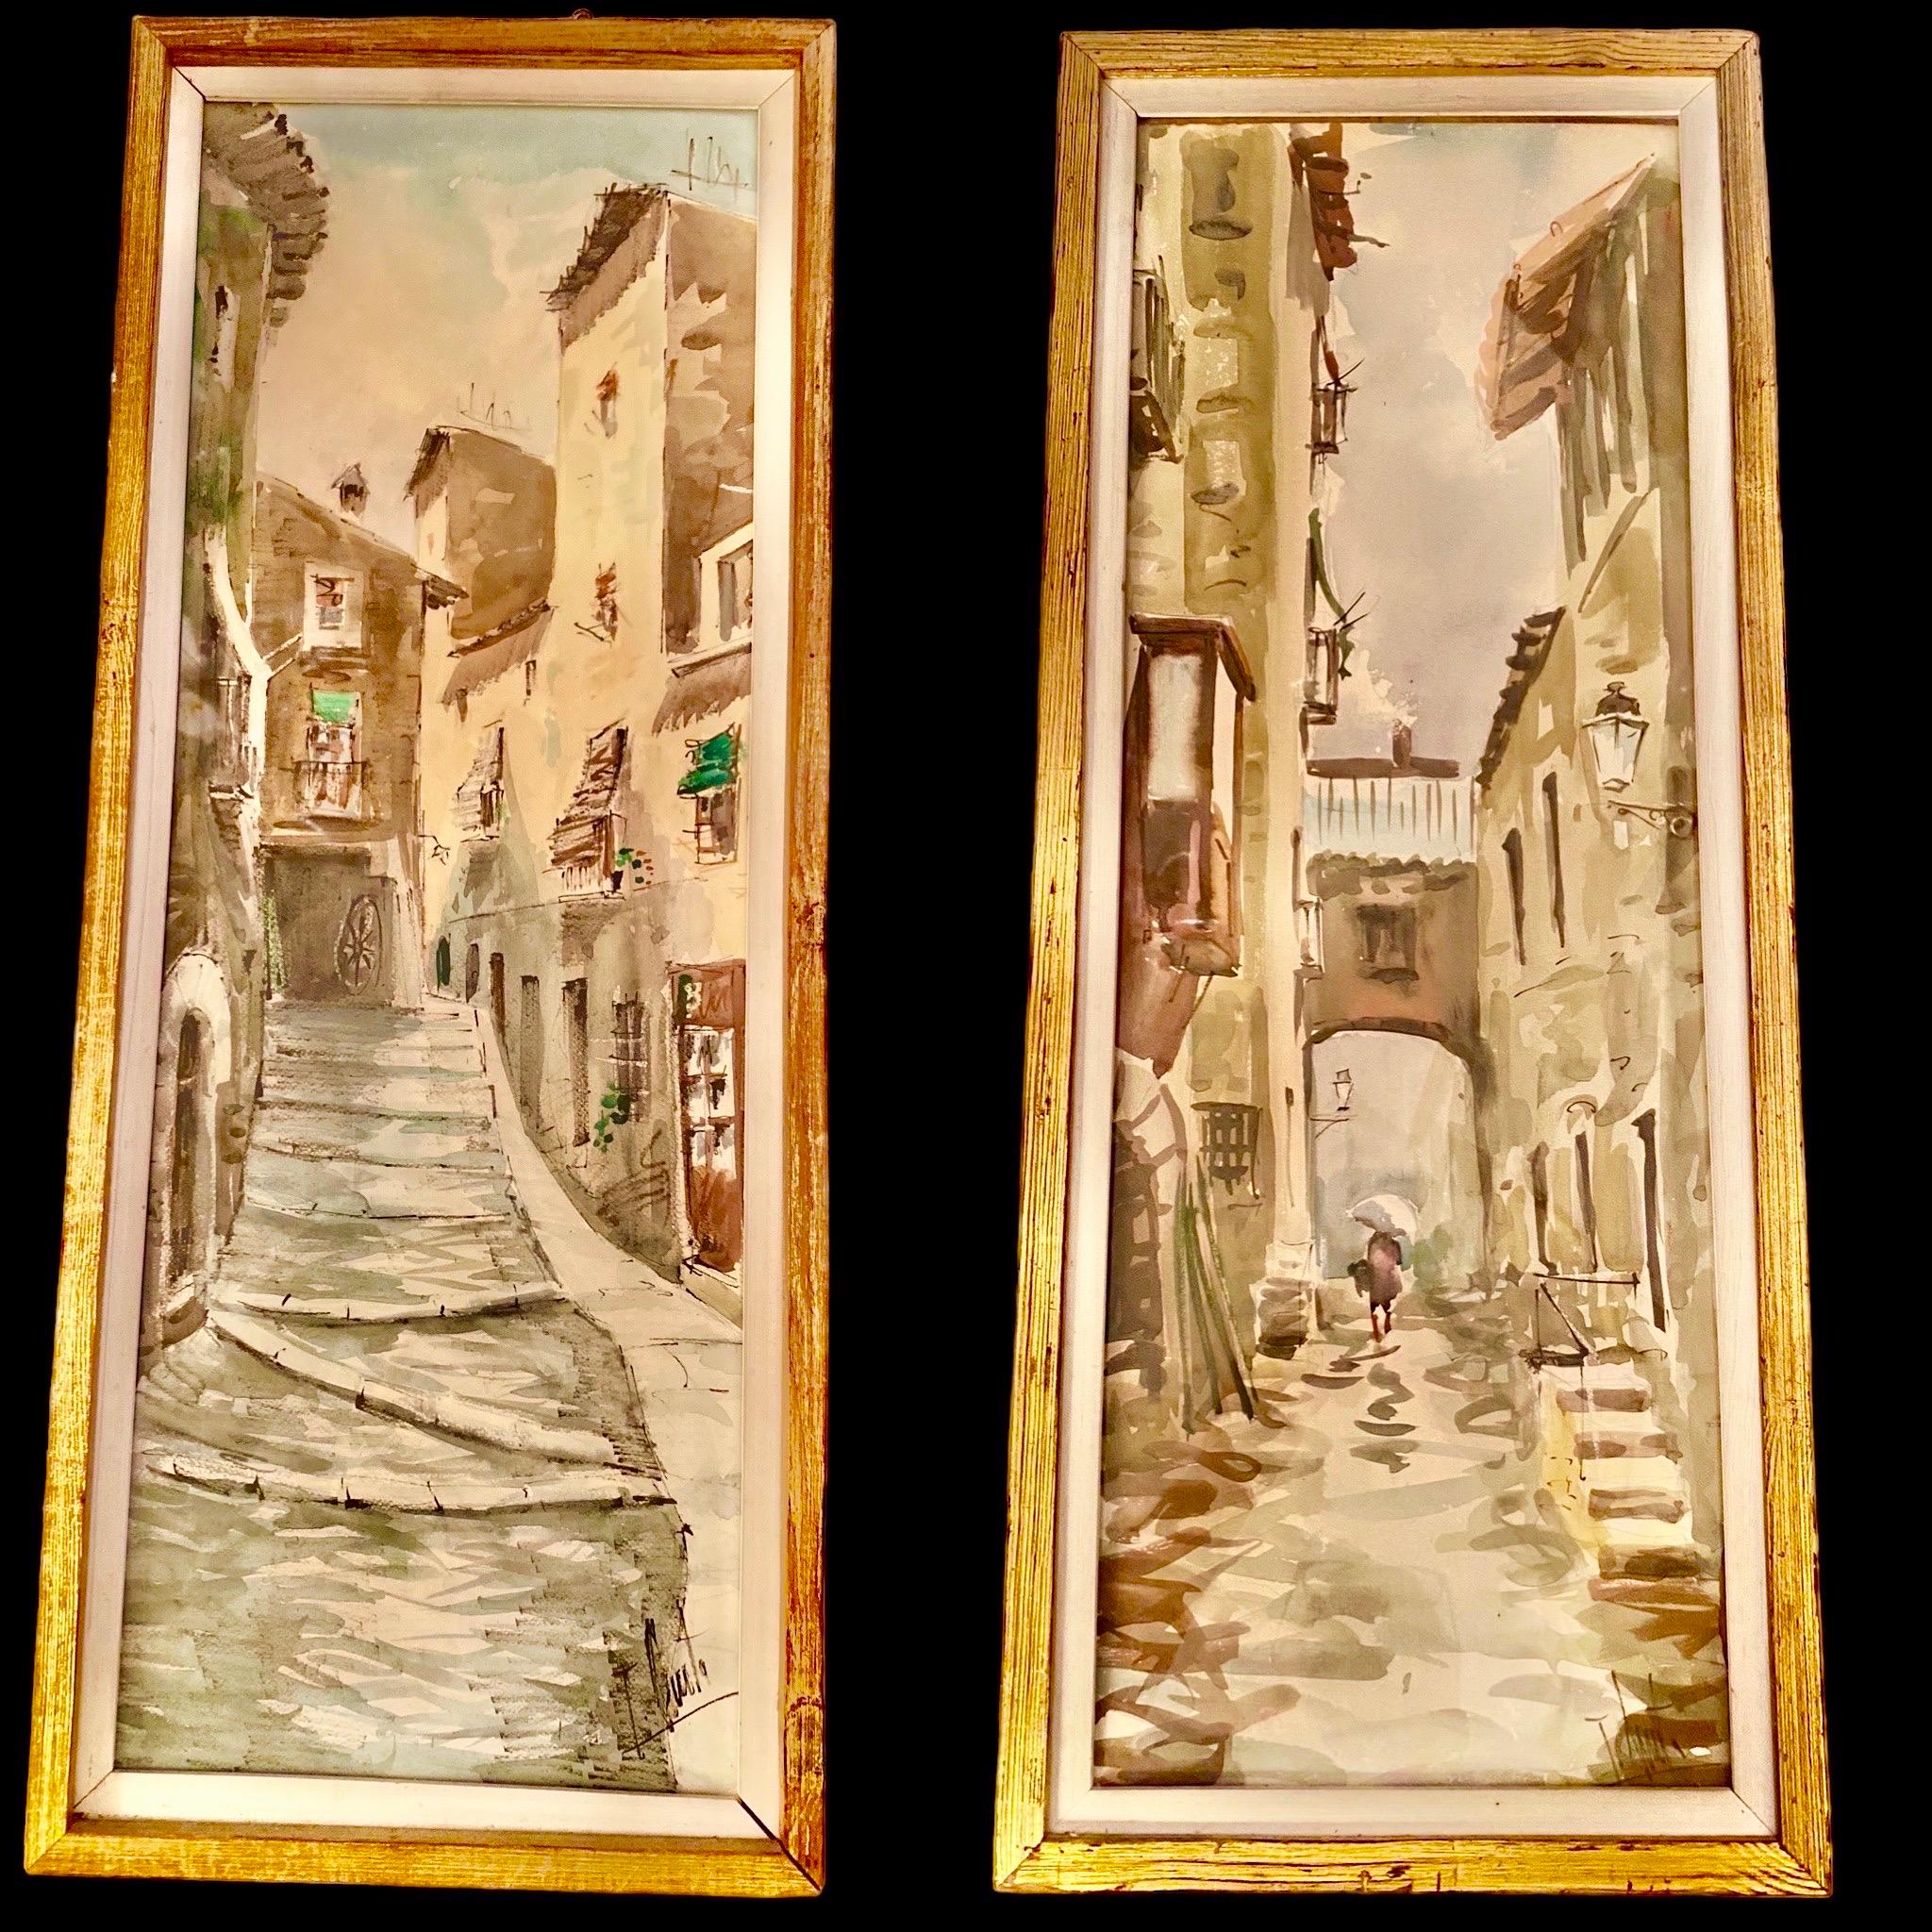 Superb pair of aquatints representing the life of an Iberian village in the Balearic region. Very nice performance and creation from the 50s/60s. It is rare to find a pair of this size and quality. Both works are signed.